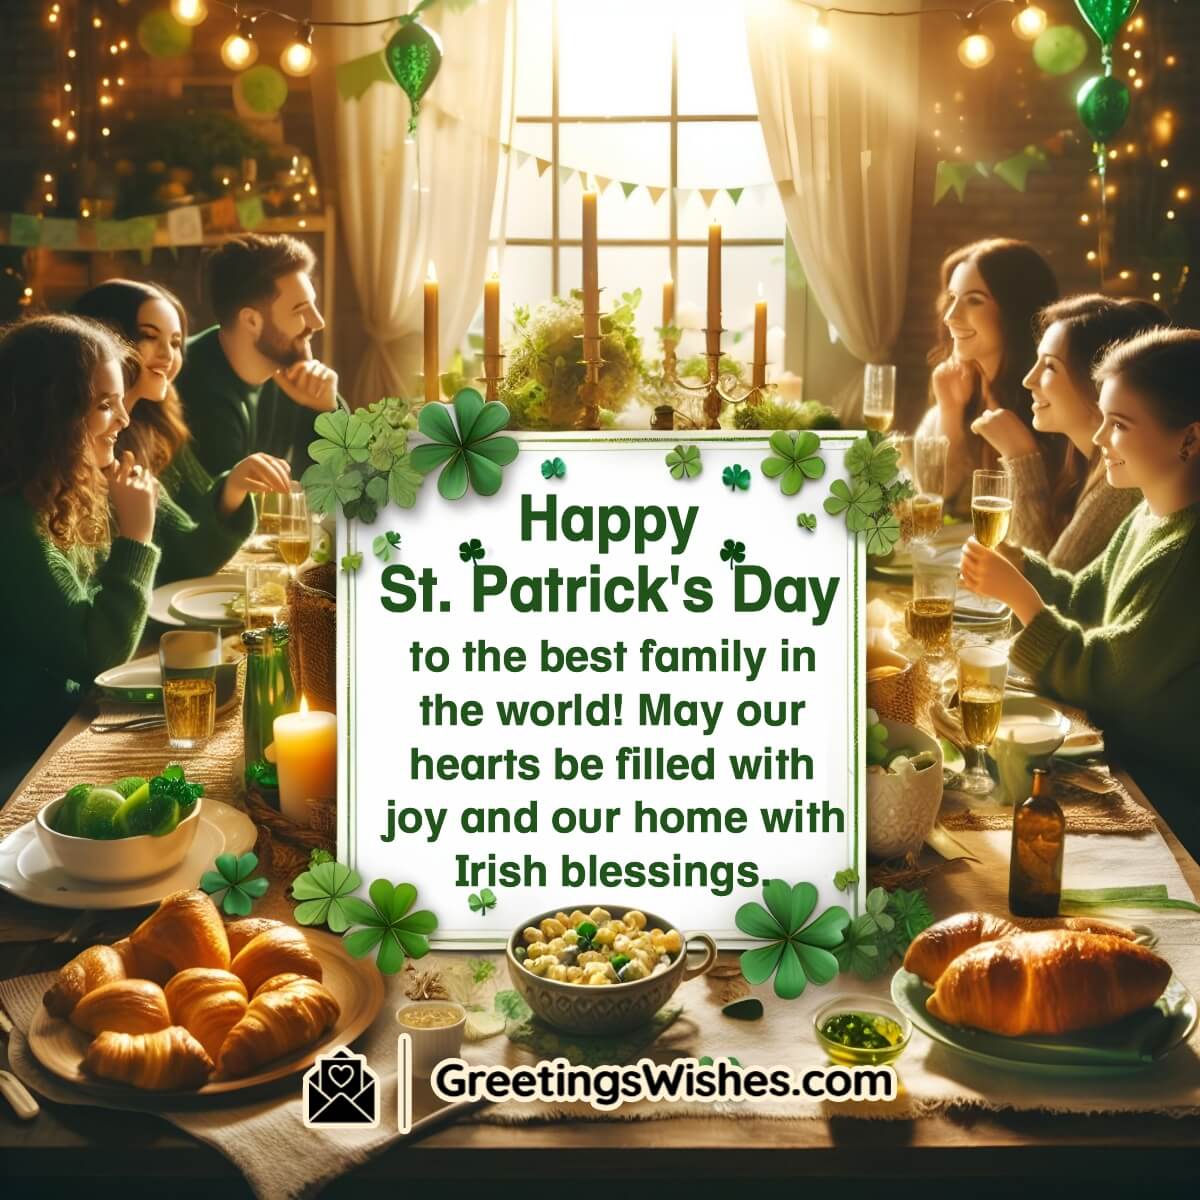 St. Patrick’s Day Wishes For Family